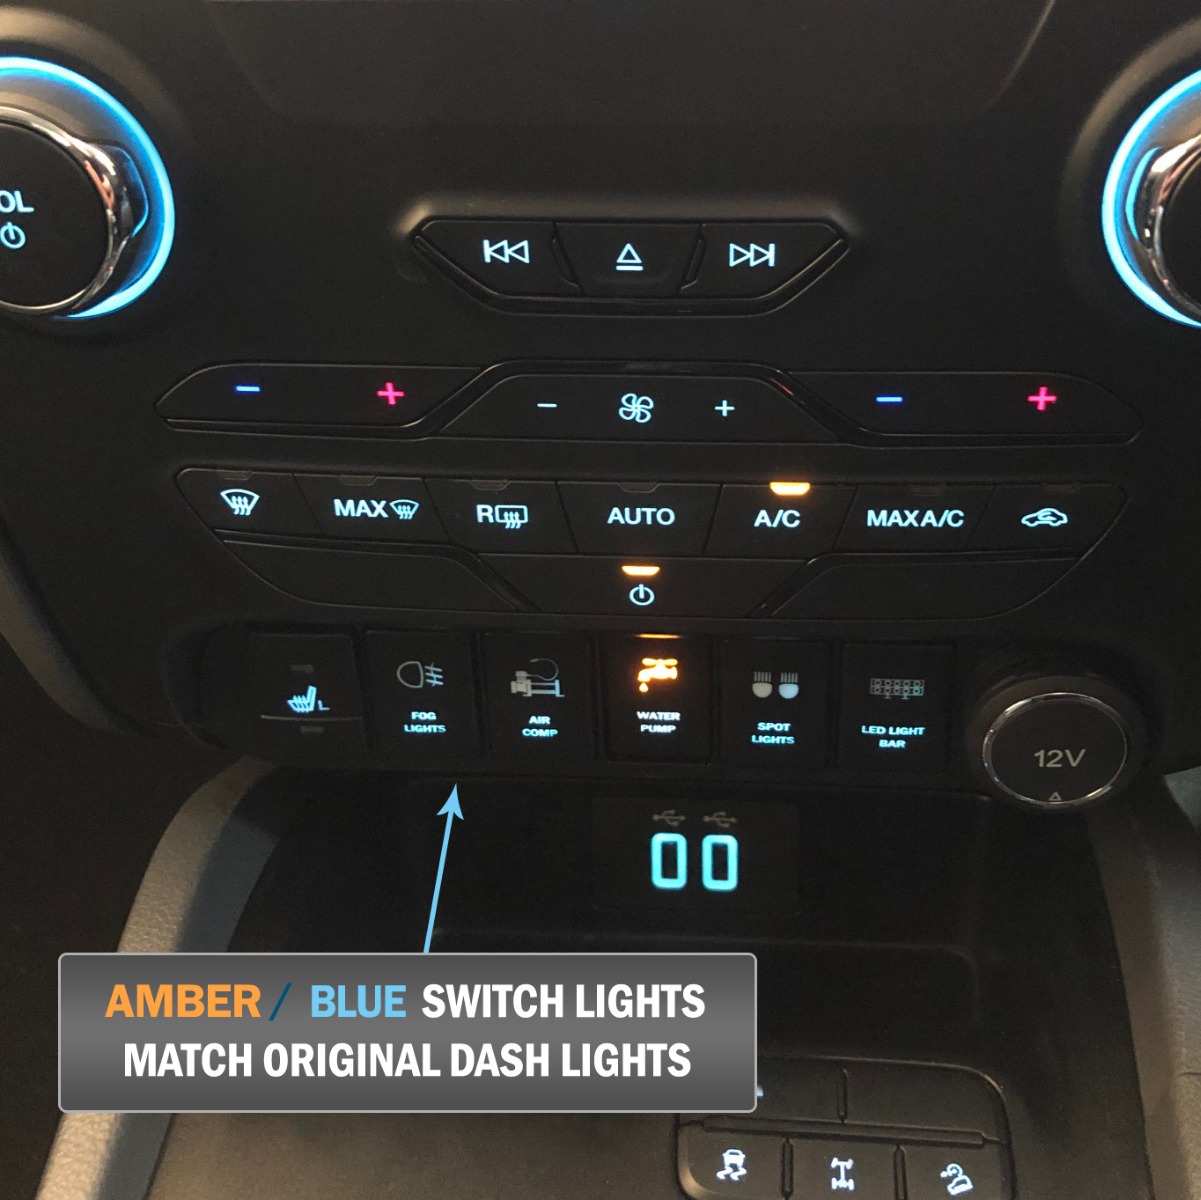 New Amber Light blue Ford Switches to match dash lights